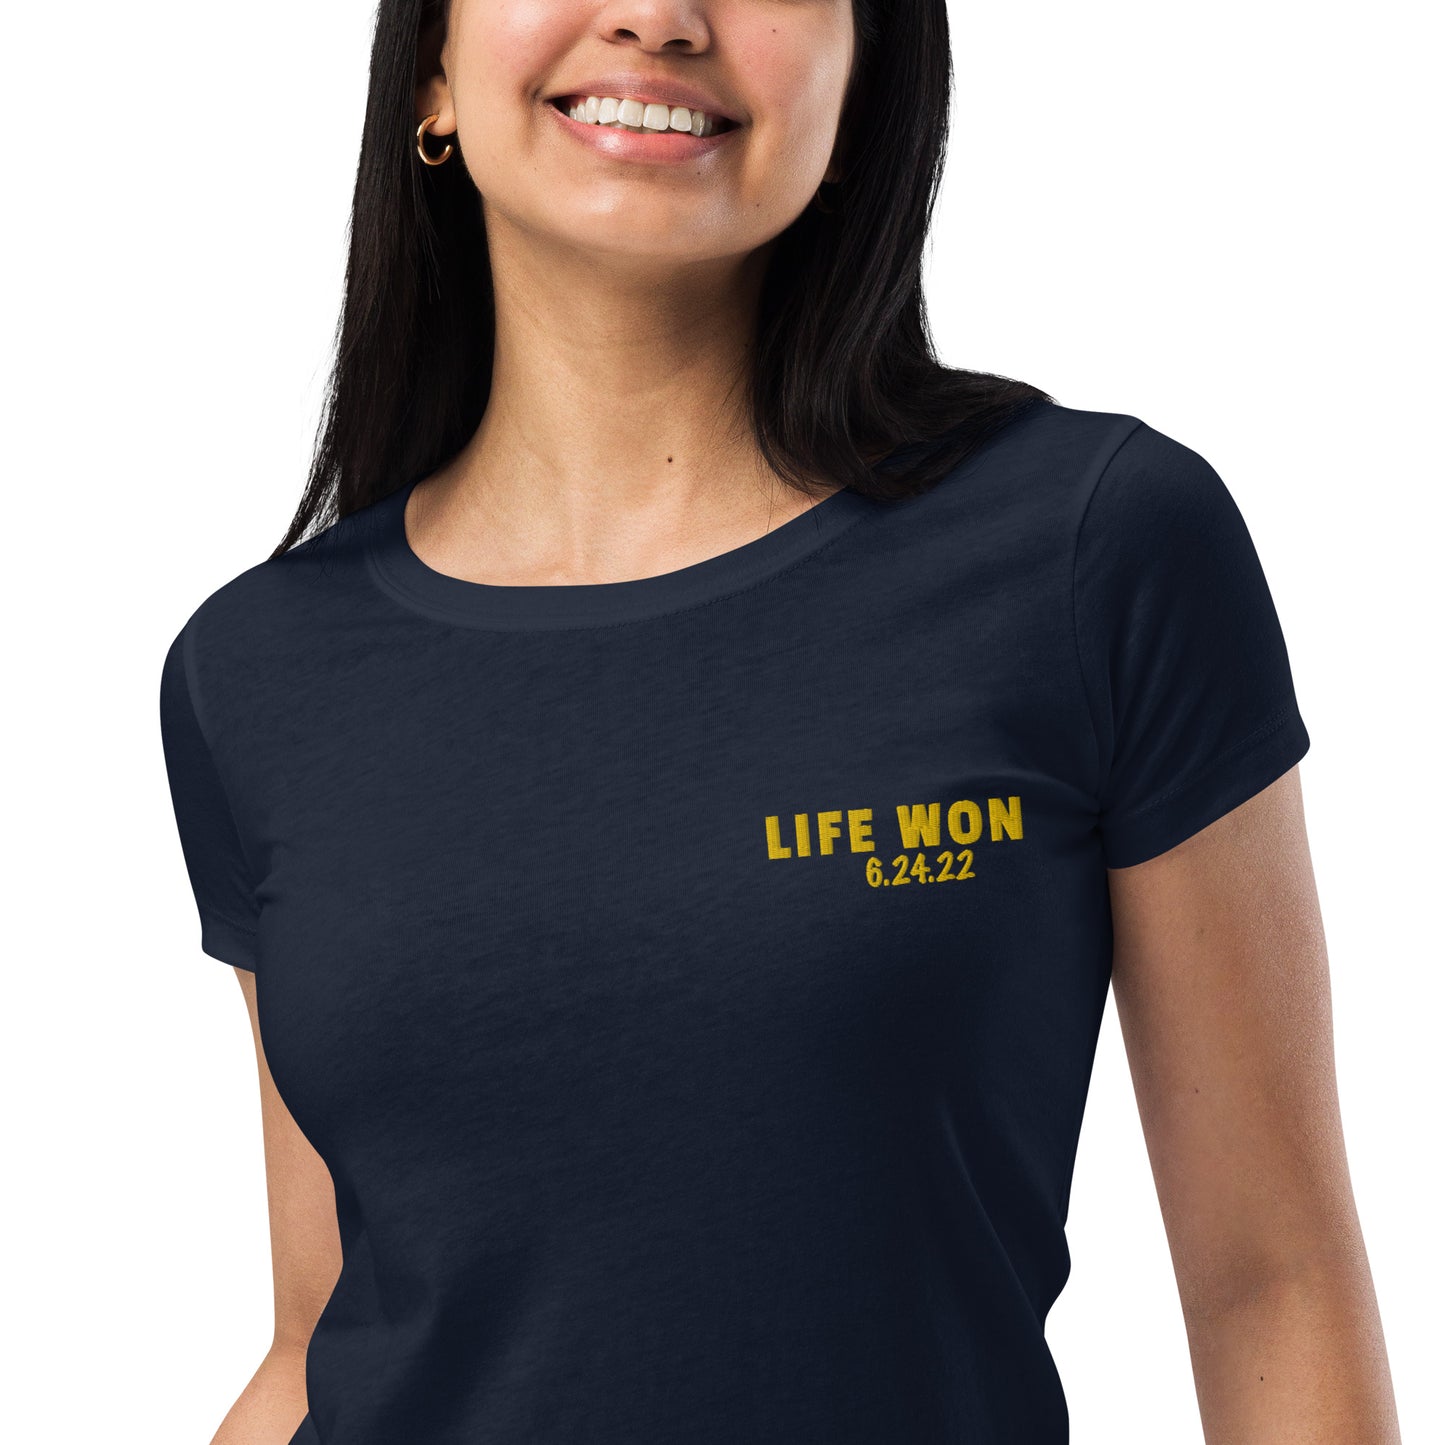 Life Won 6.24.22 Embroidered Women’s fitted t-shirt-Ladies T-Shirt-PureDesignTees